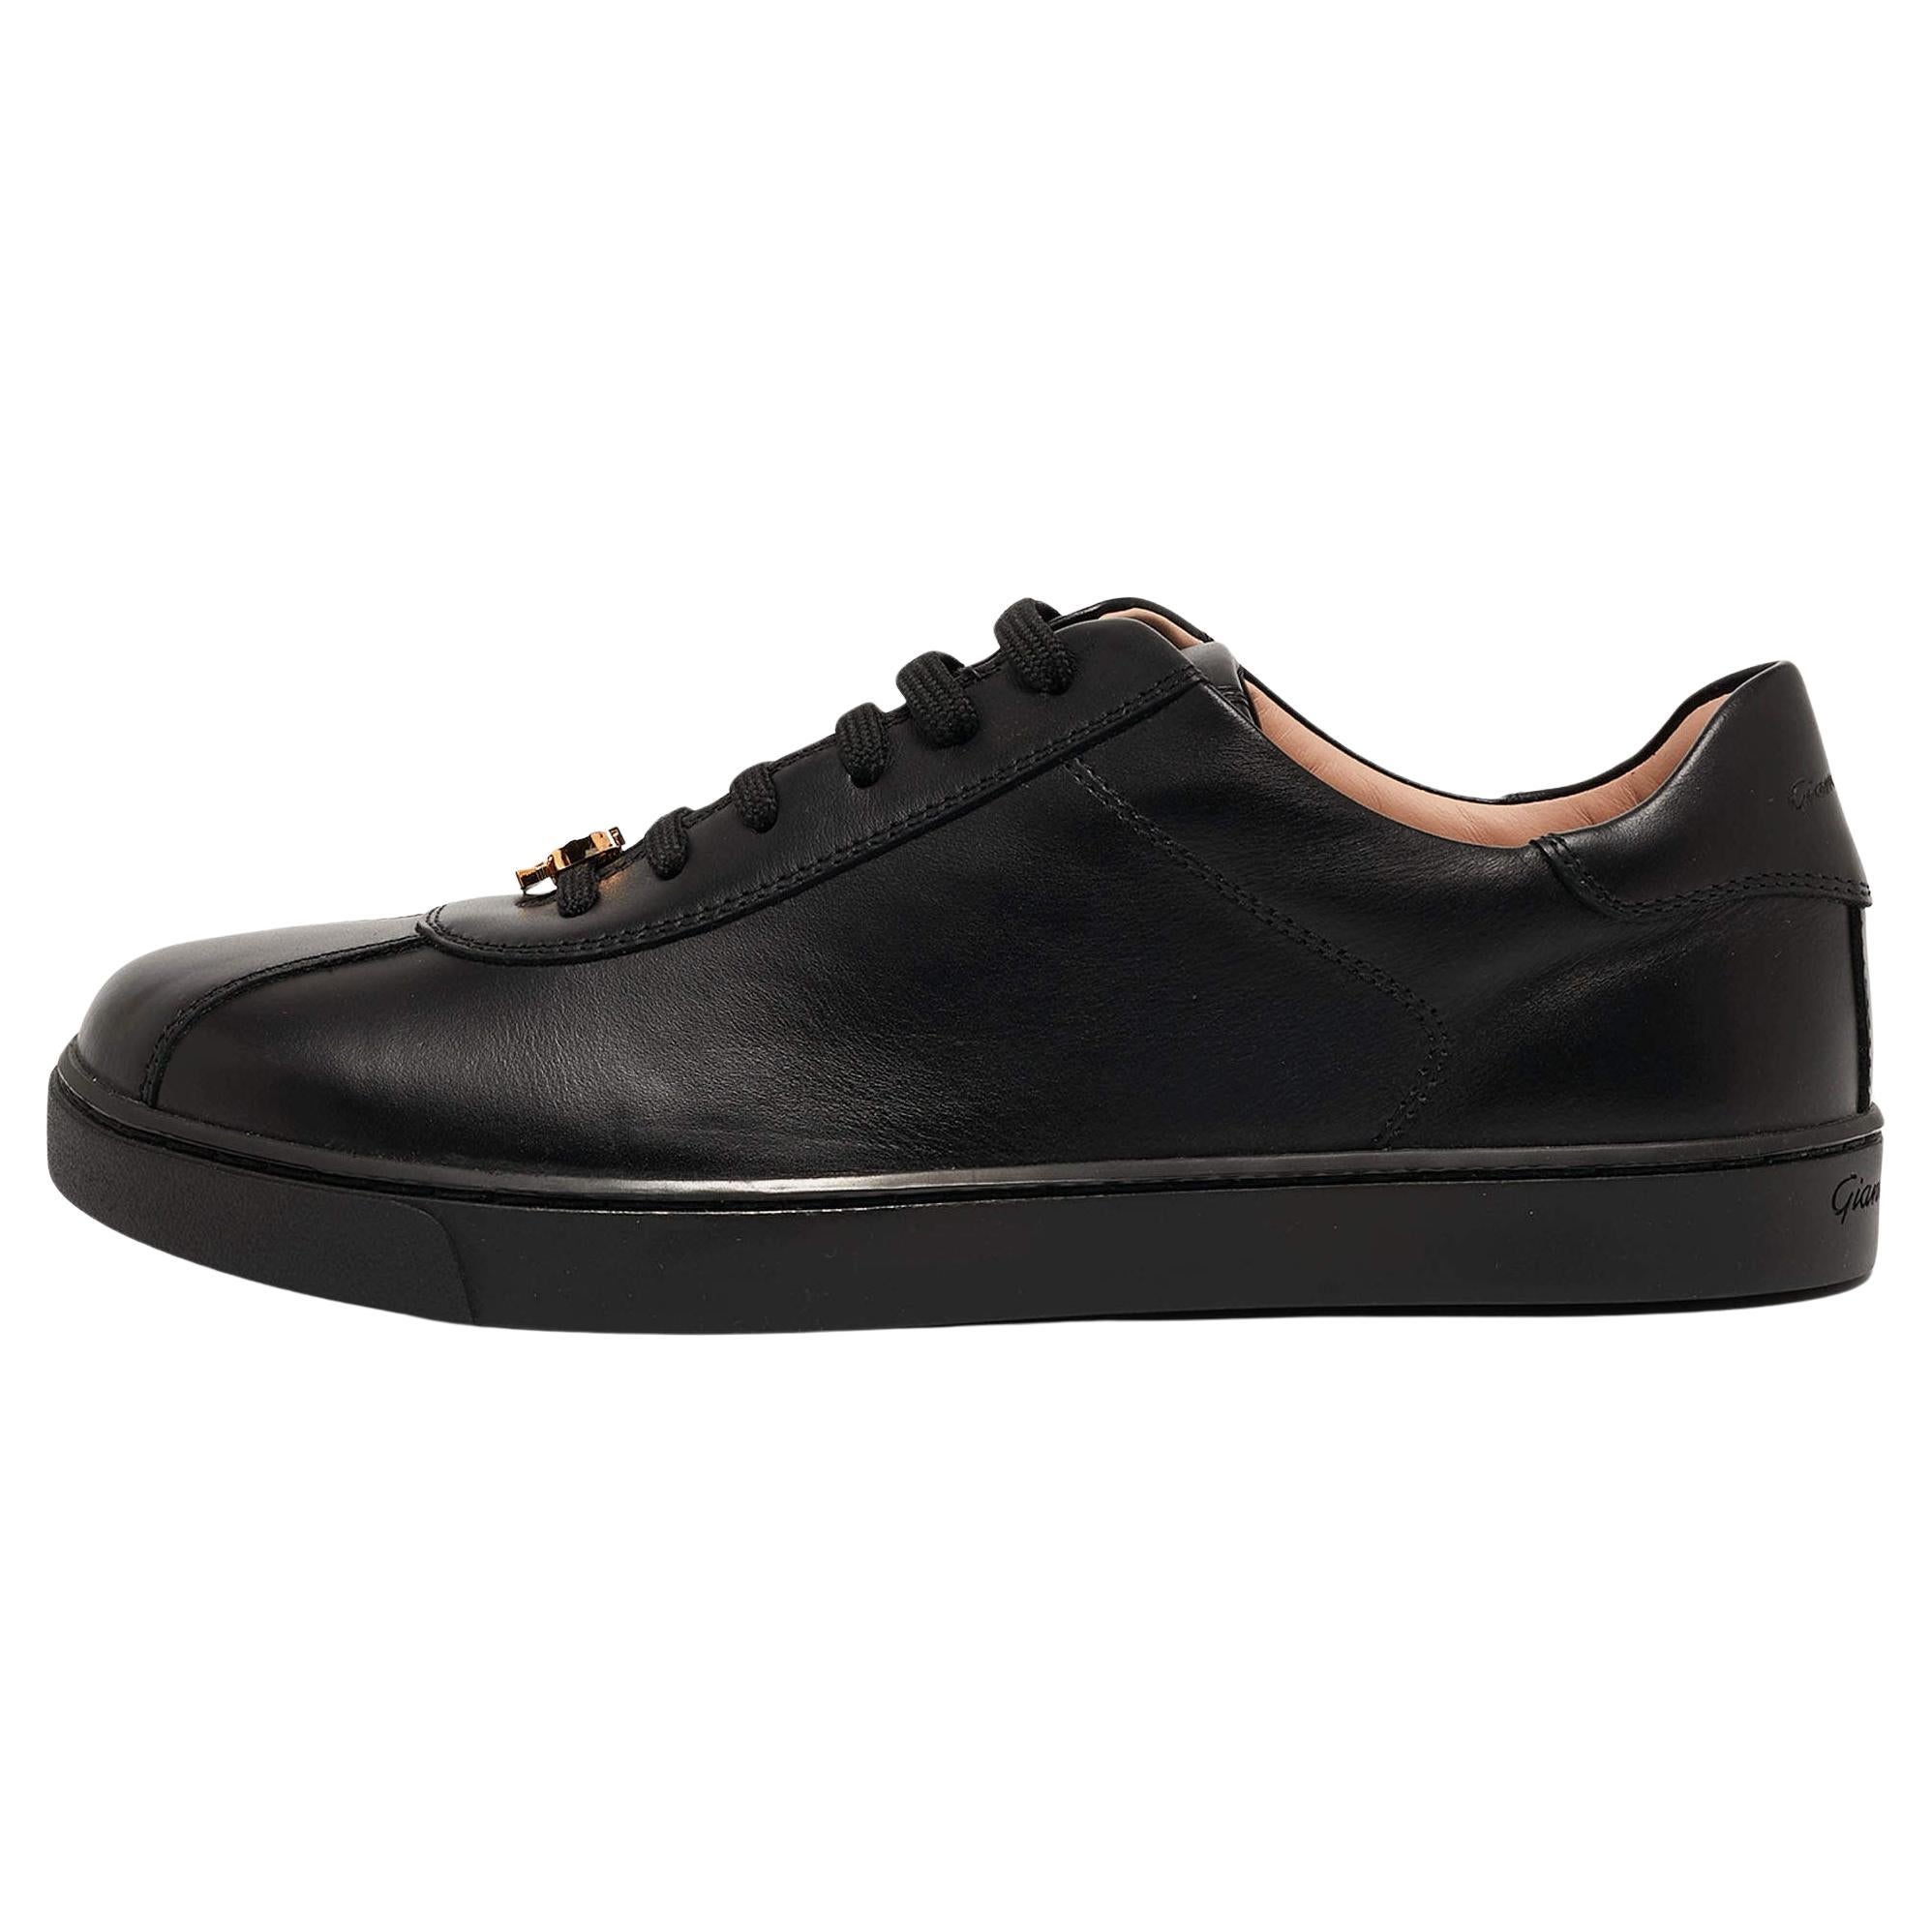 Gianvito Rossi Black Leather Low Top Sneakers Size 37.5 For Sale